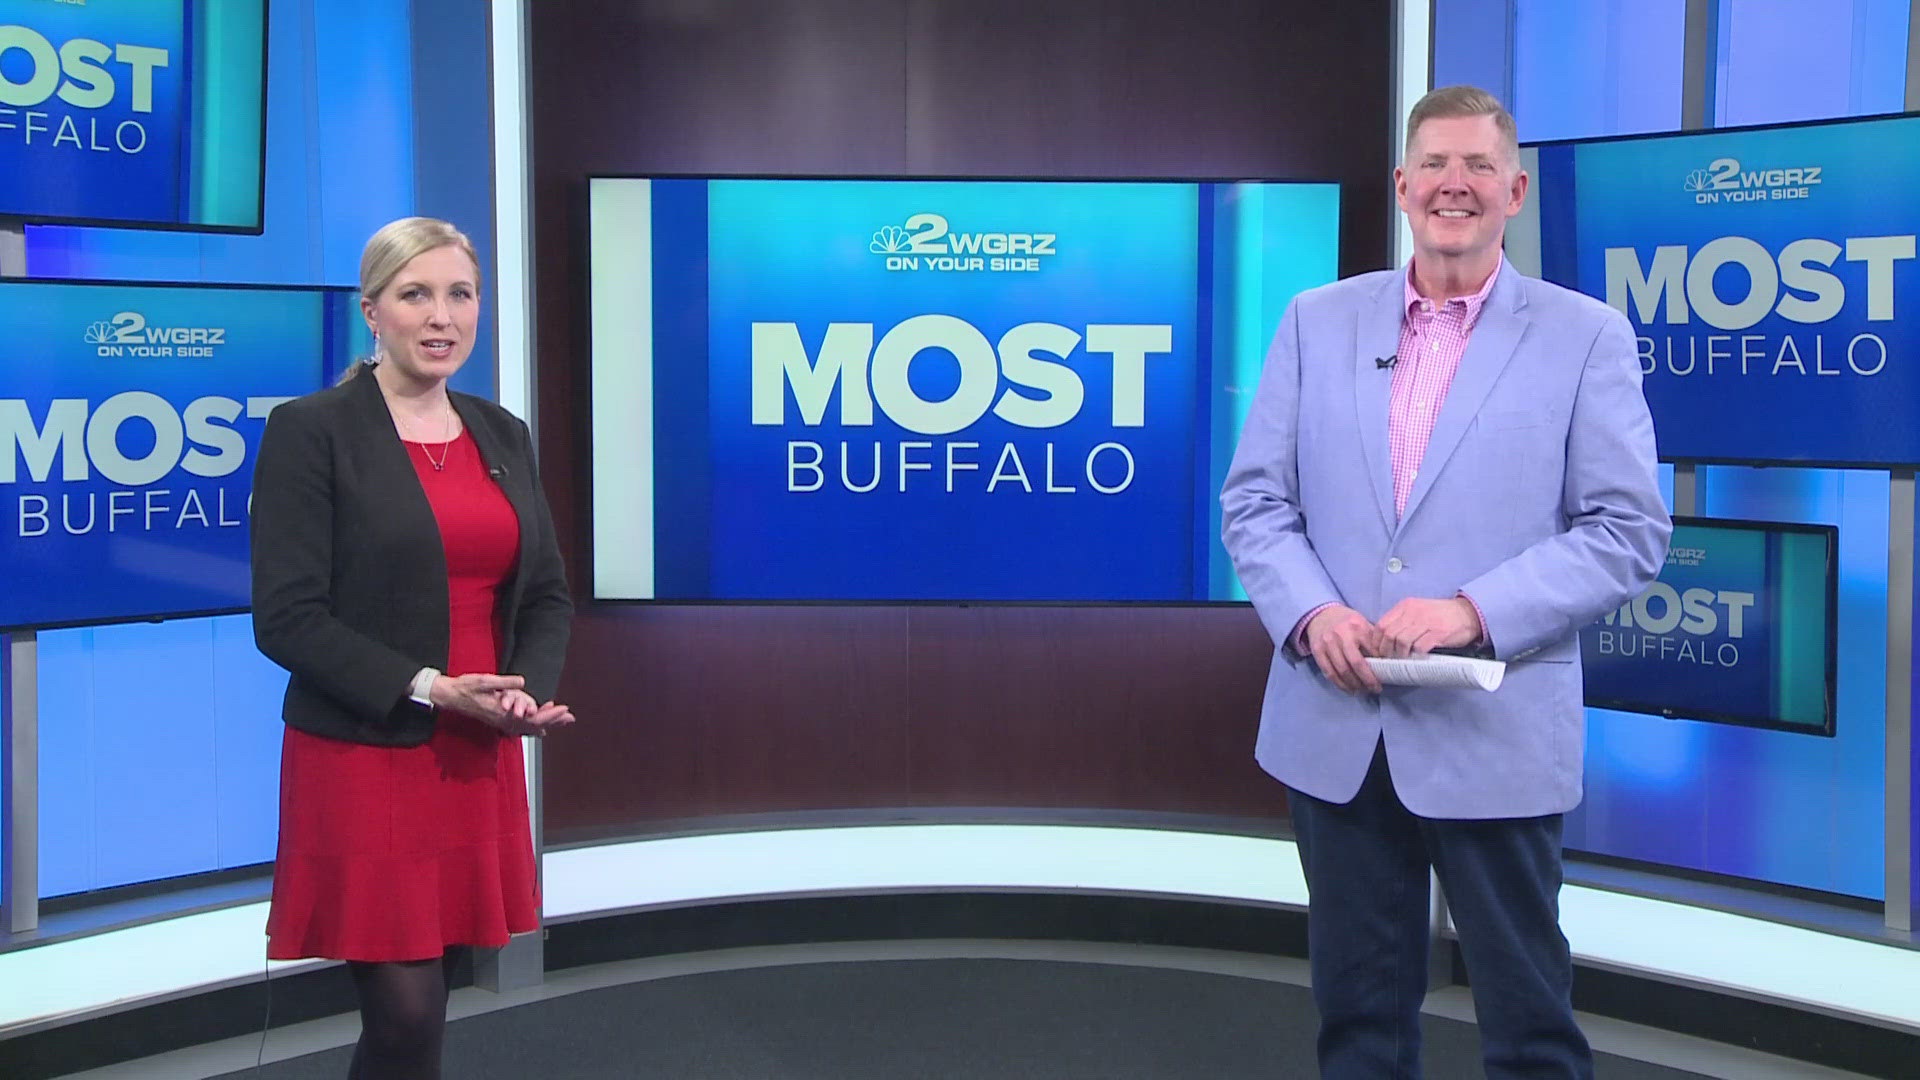 Patrick Kaler with Visit Buffalo Niagara has all your weekend events around WNY